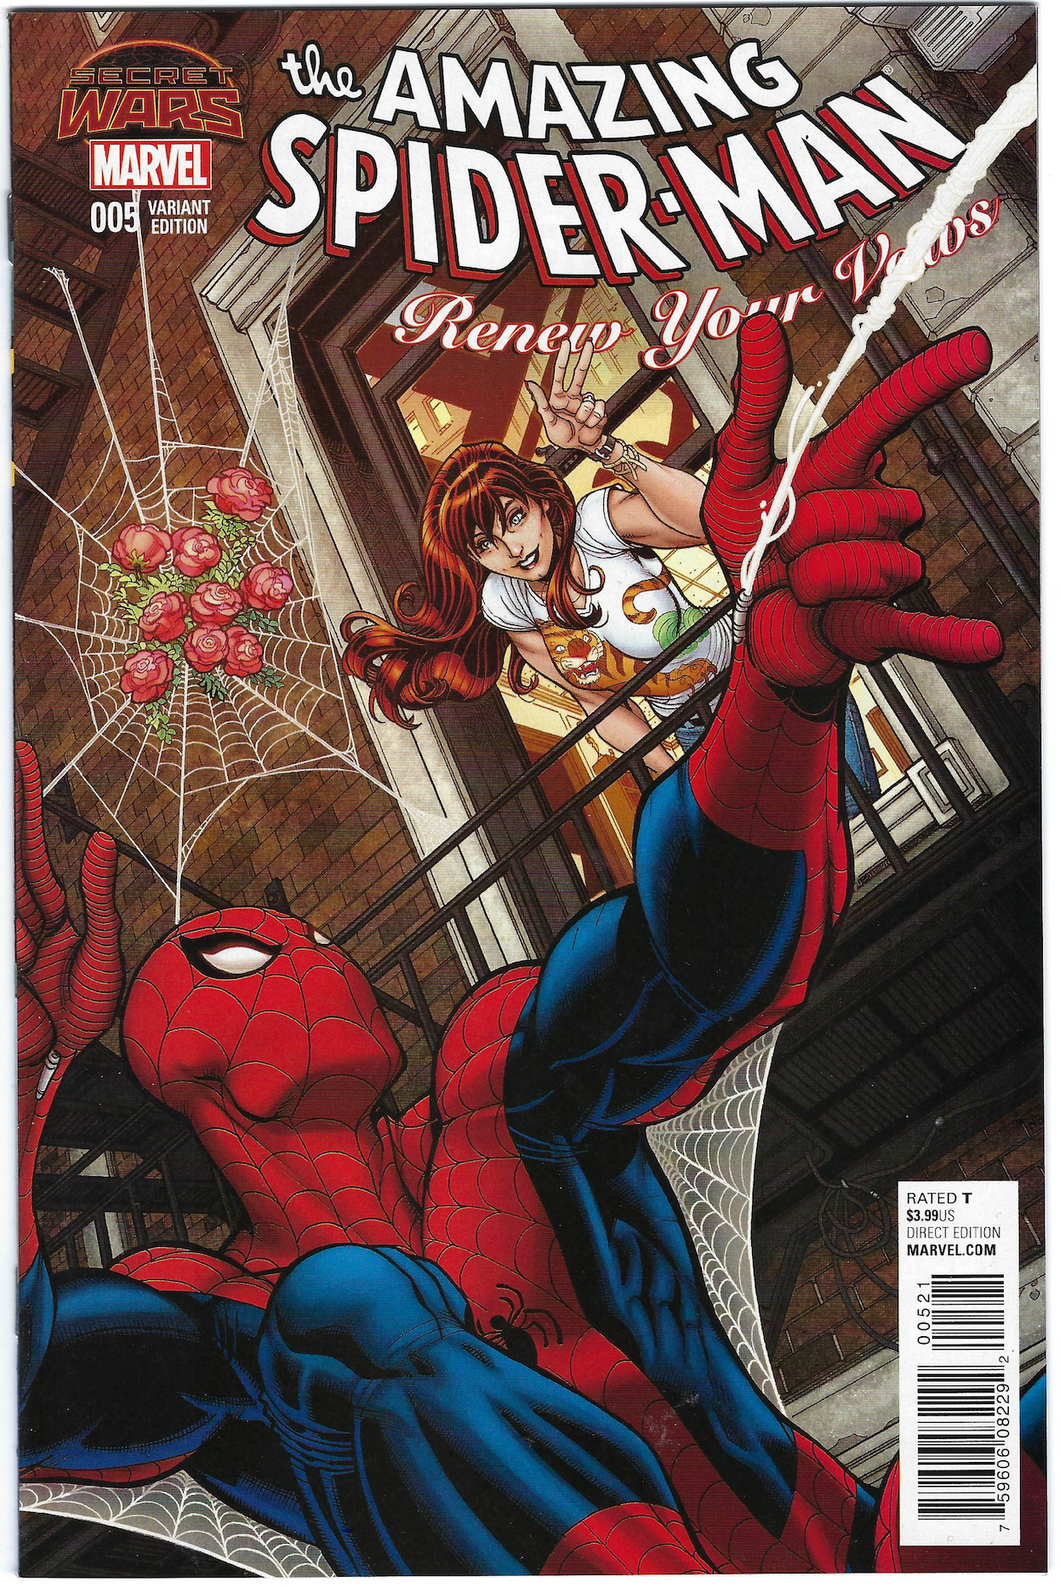 AMAZING SPIDER-MAN RENEW YOUR VOWS #5~MARY JANE VARIANT EDITION